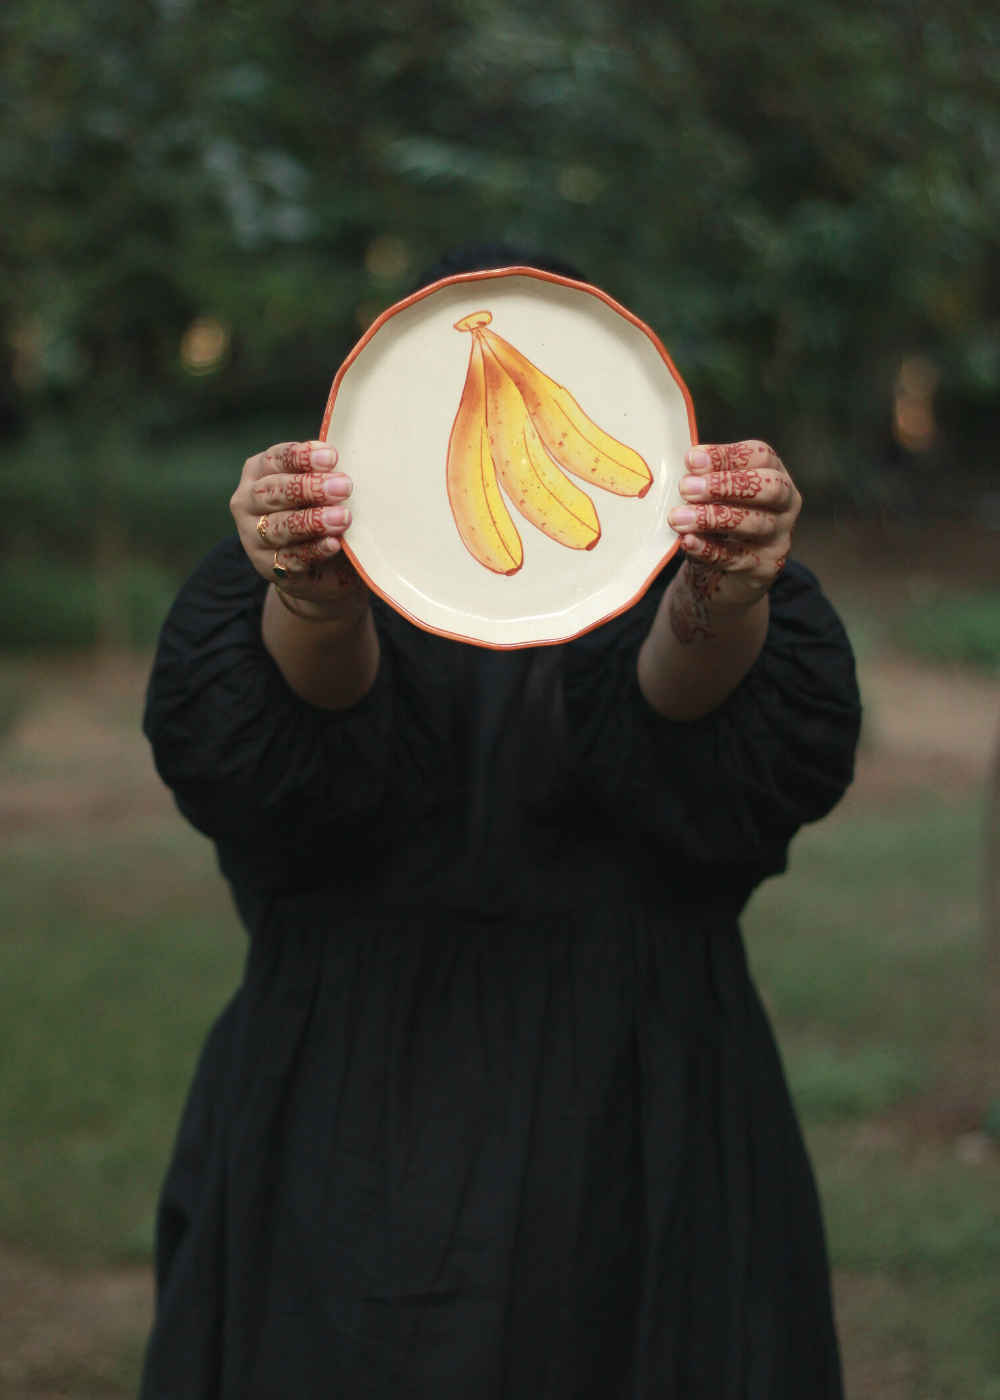 Someone showing banana plate on a garden